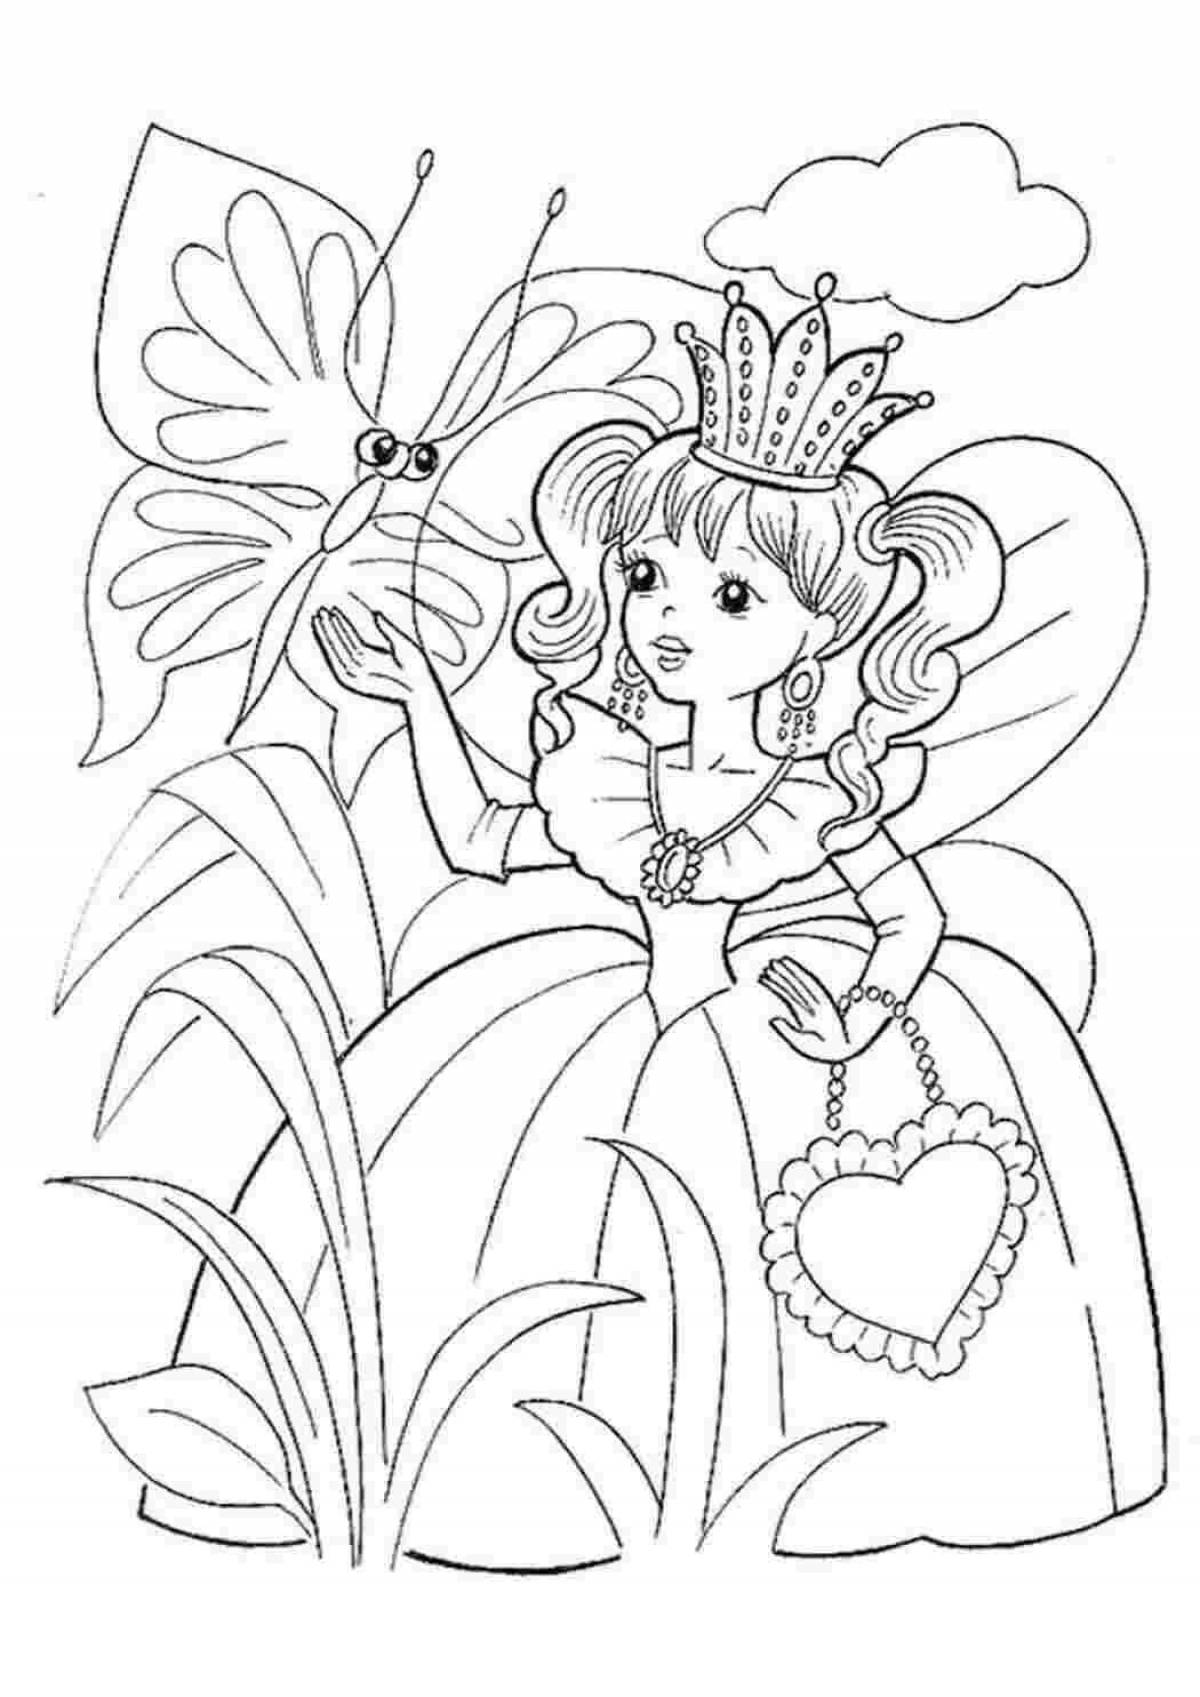 Coloring pages for children 6-7 years old fairies